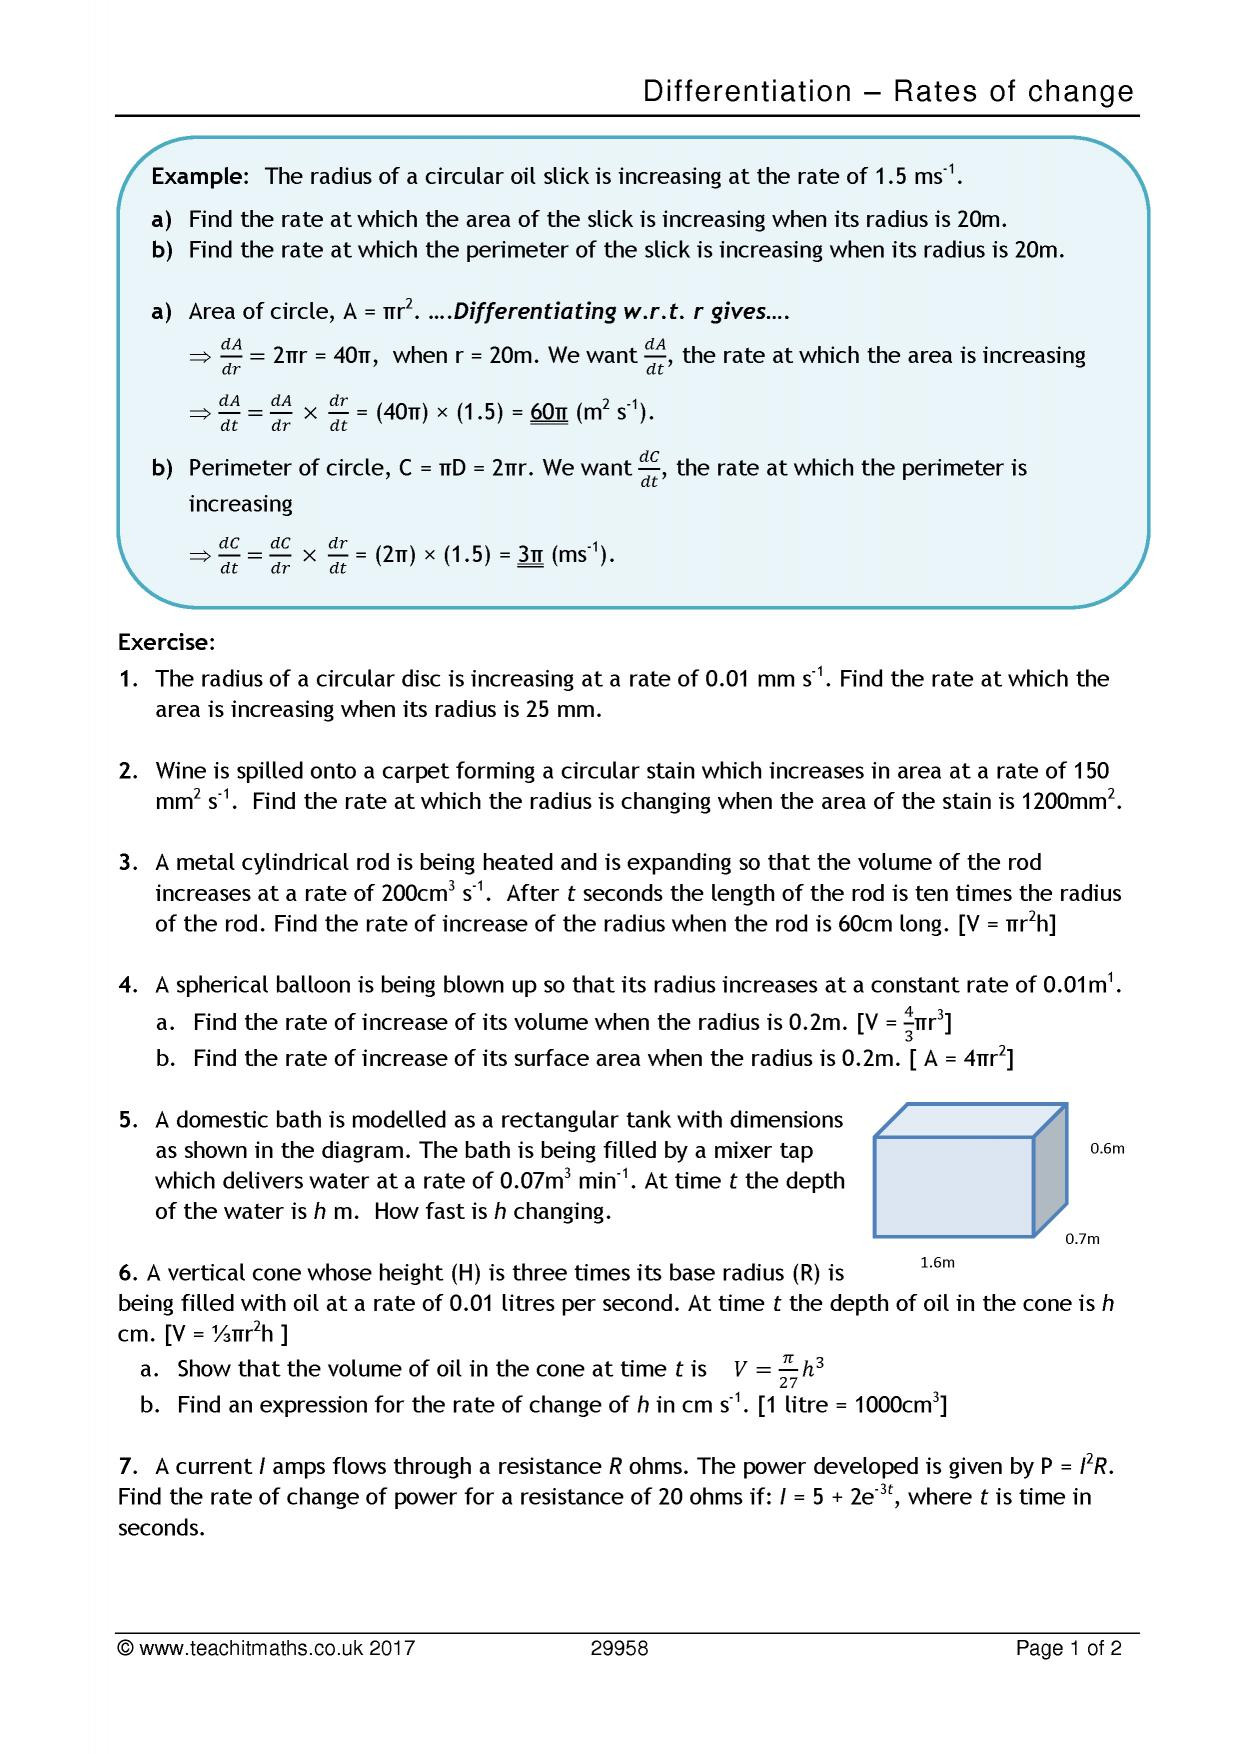 Constant Rate Of Change Worksheet Differentiation Rates Of Change